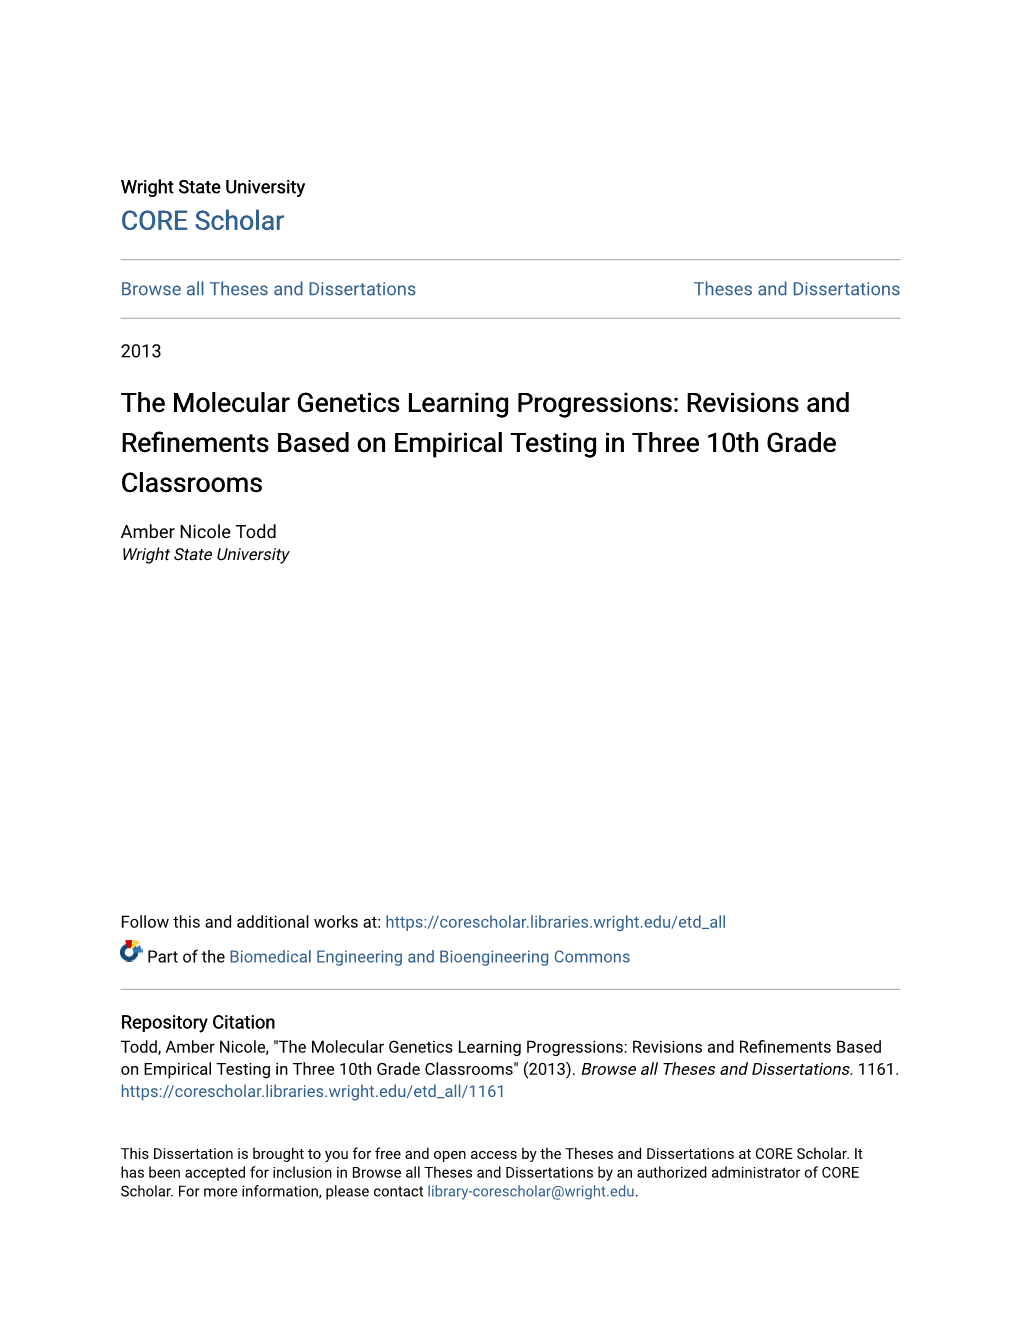 The Molecular Genetics Learning Progressions: Revisions and Refinements Based on Empirical Estingt in Three 10Th Grade Classrooms